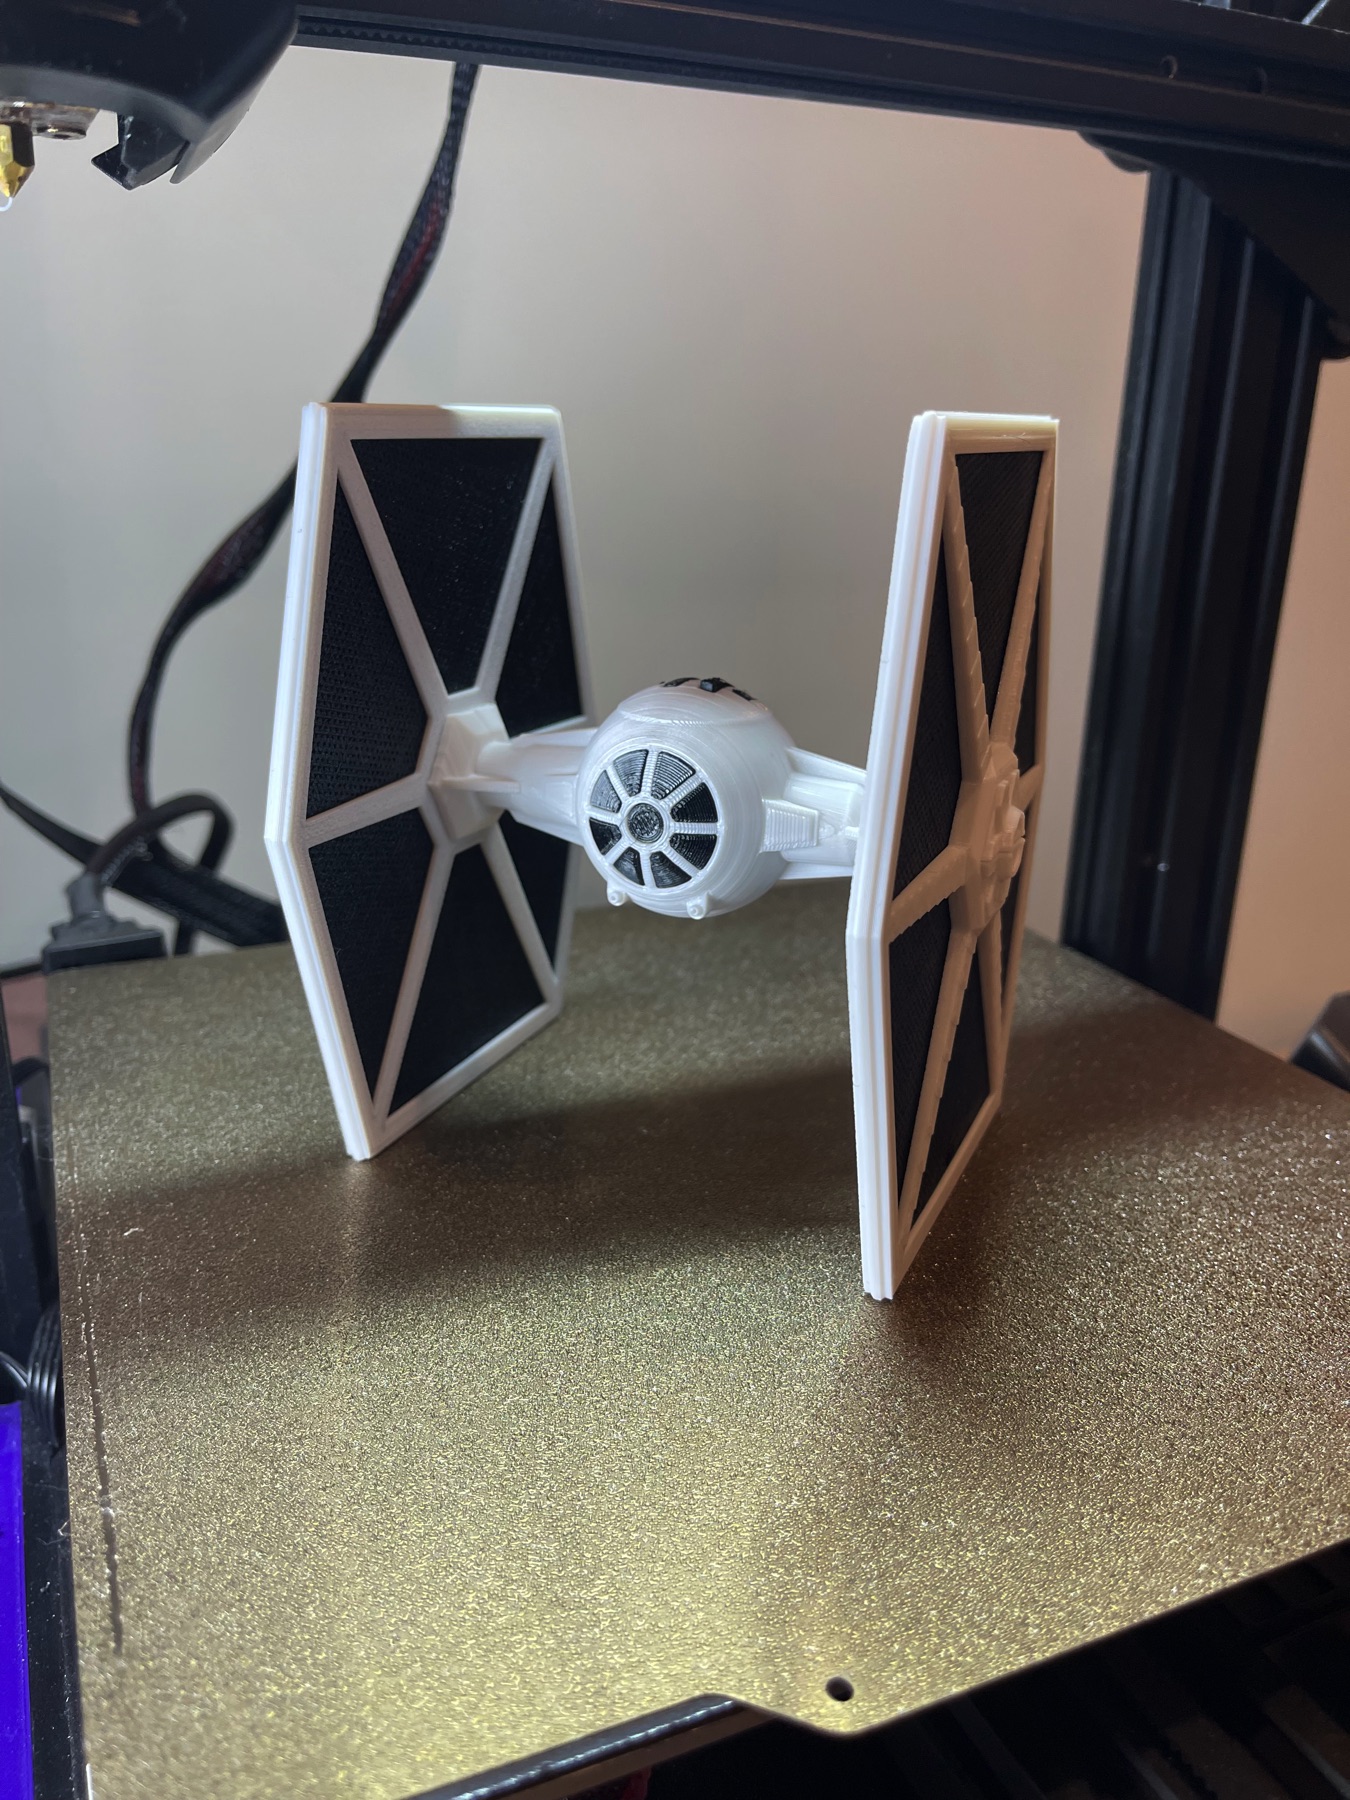 3d printed tie fighter model in a white and black color scheme.